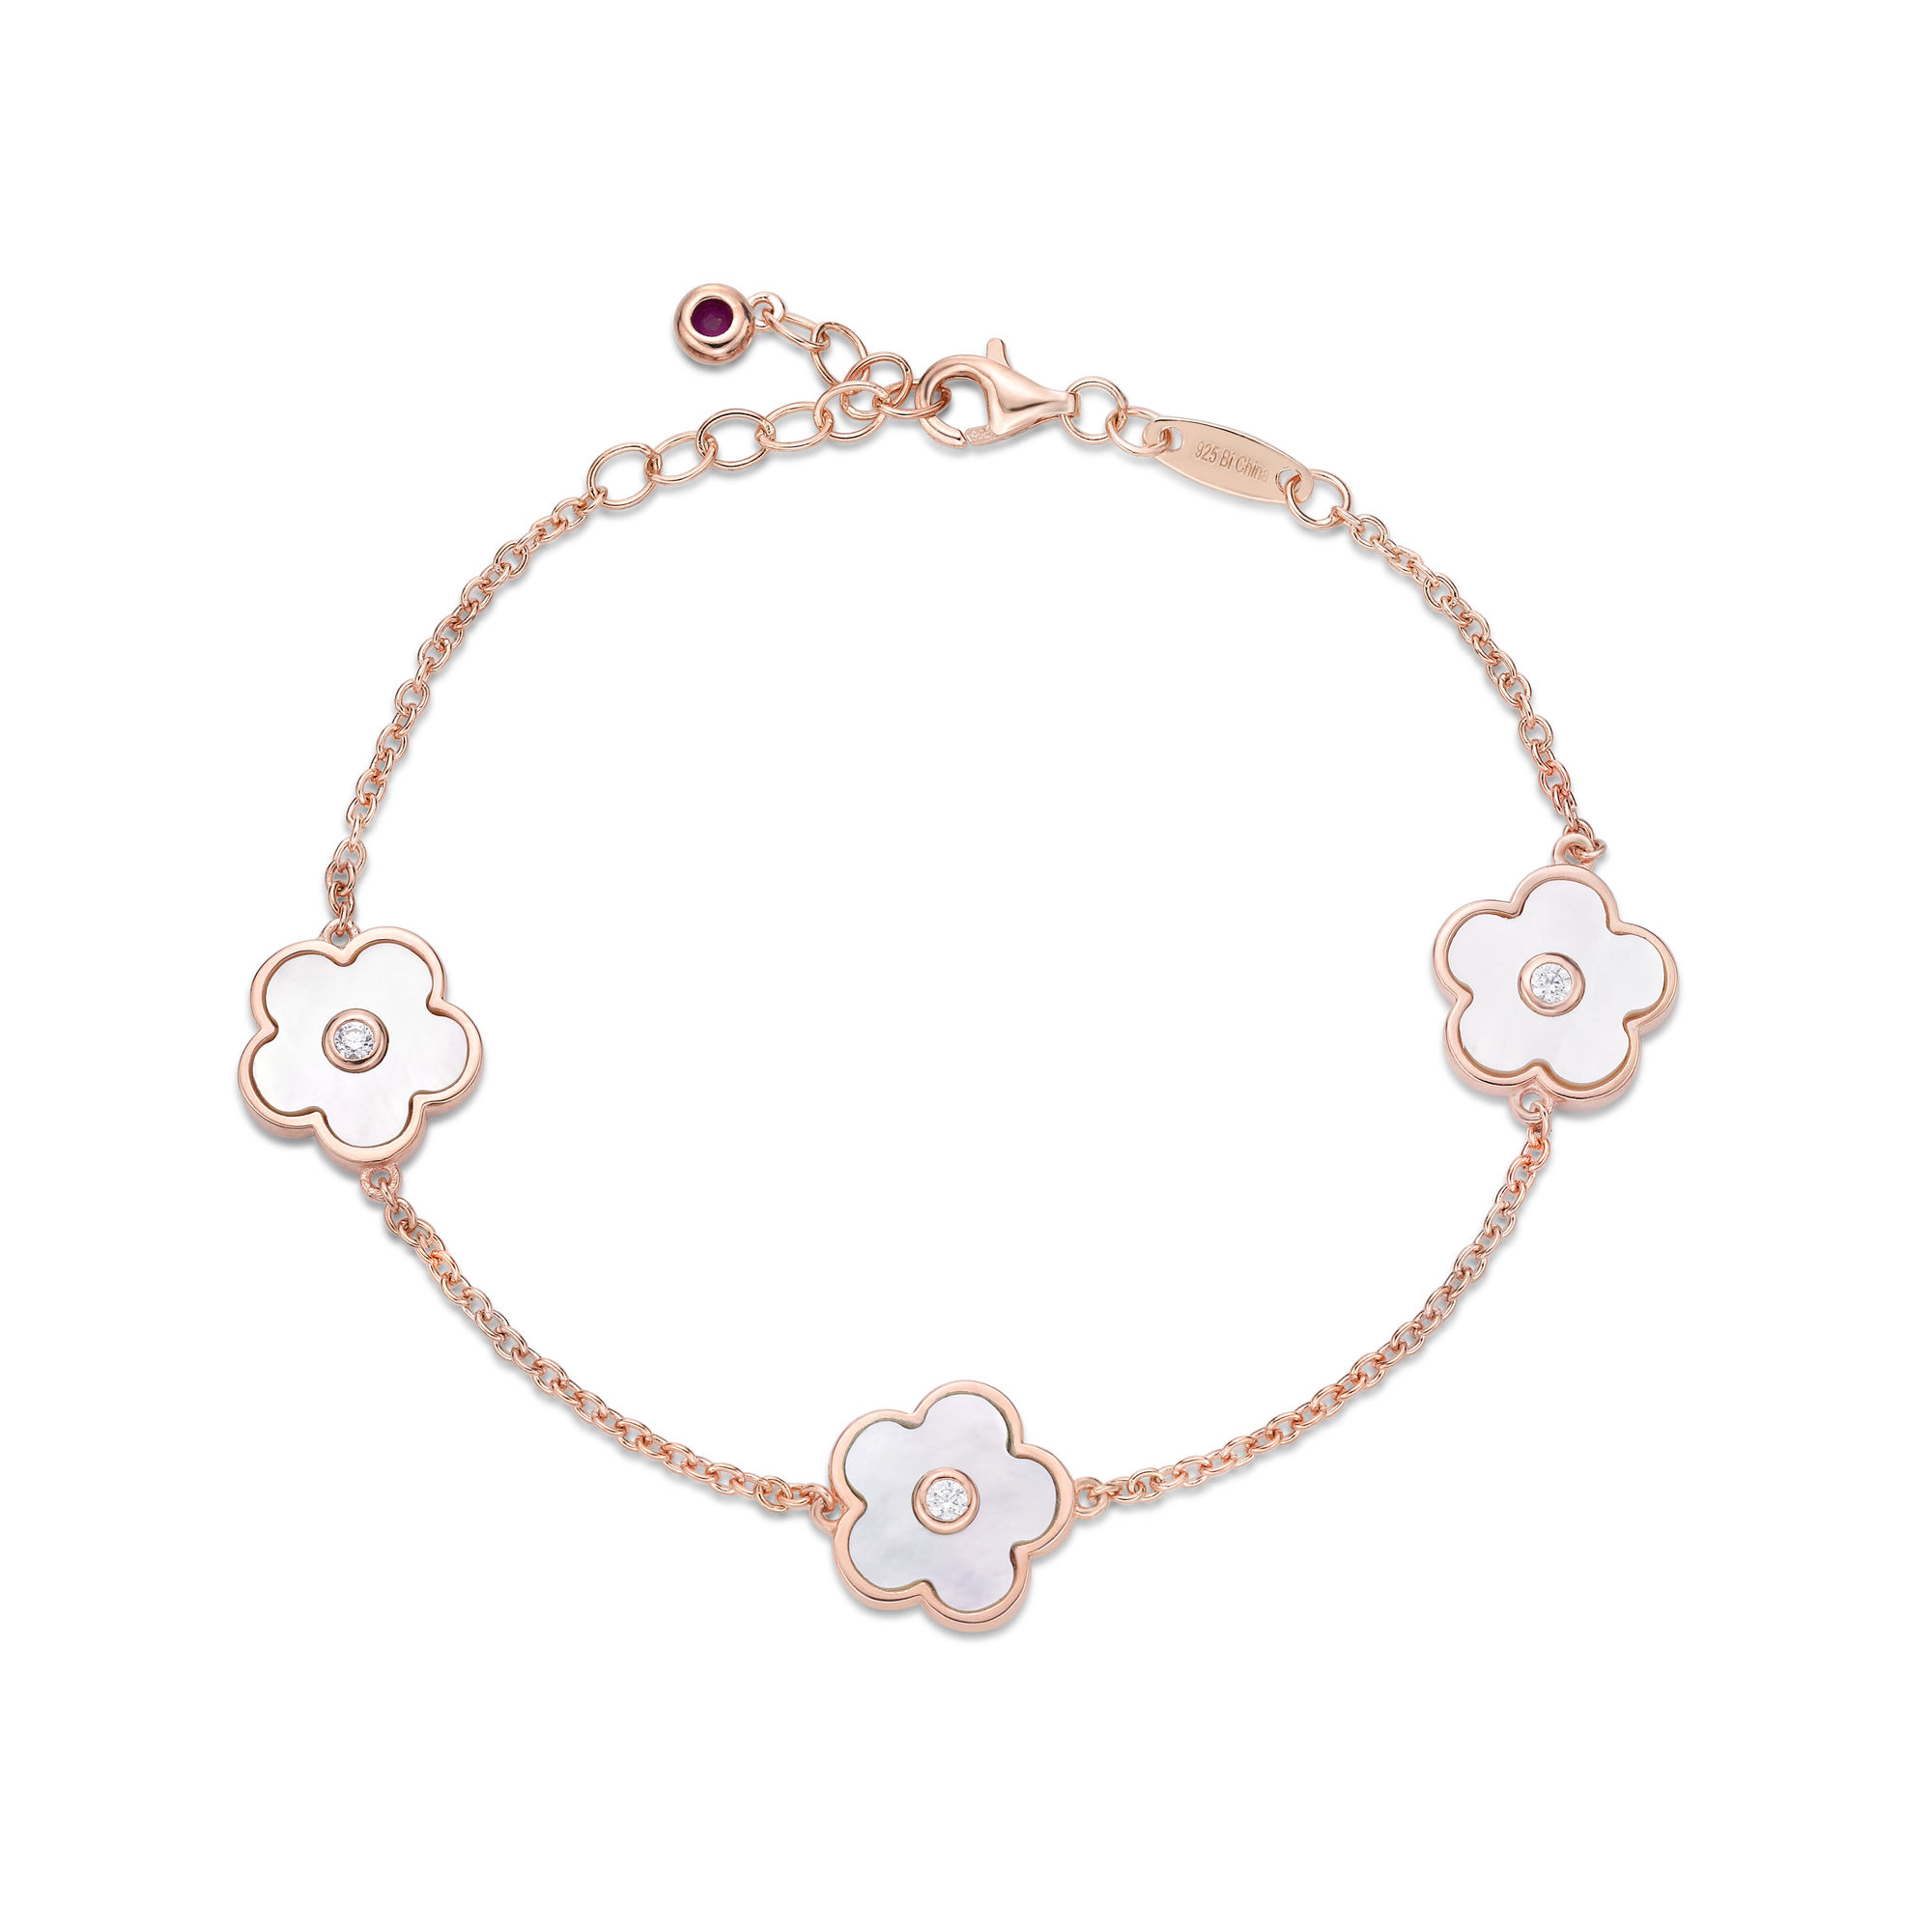 Lavari Jewelers Women's Mother of Pearl Triple Flower Bracelet with Lobster Clasp, 925 Pink Sterling Silver, Cubic Zirconia, 8 Inches